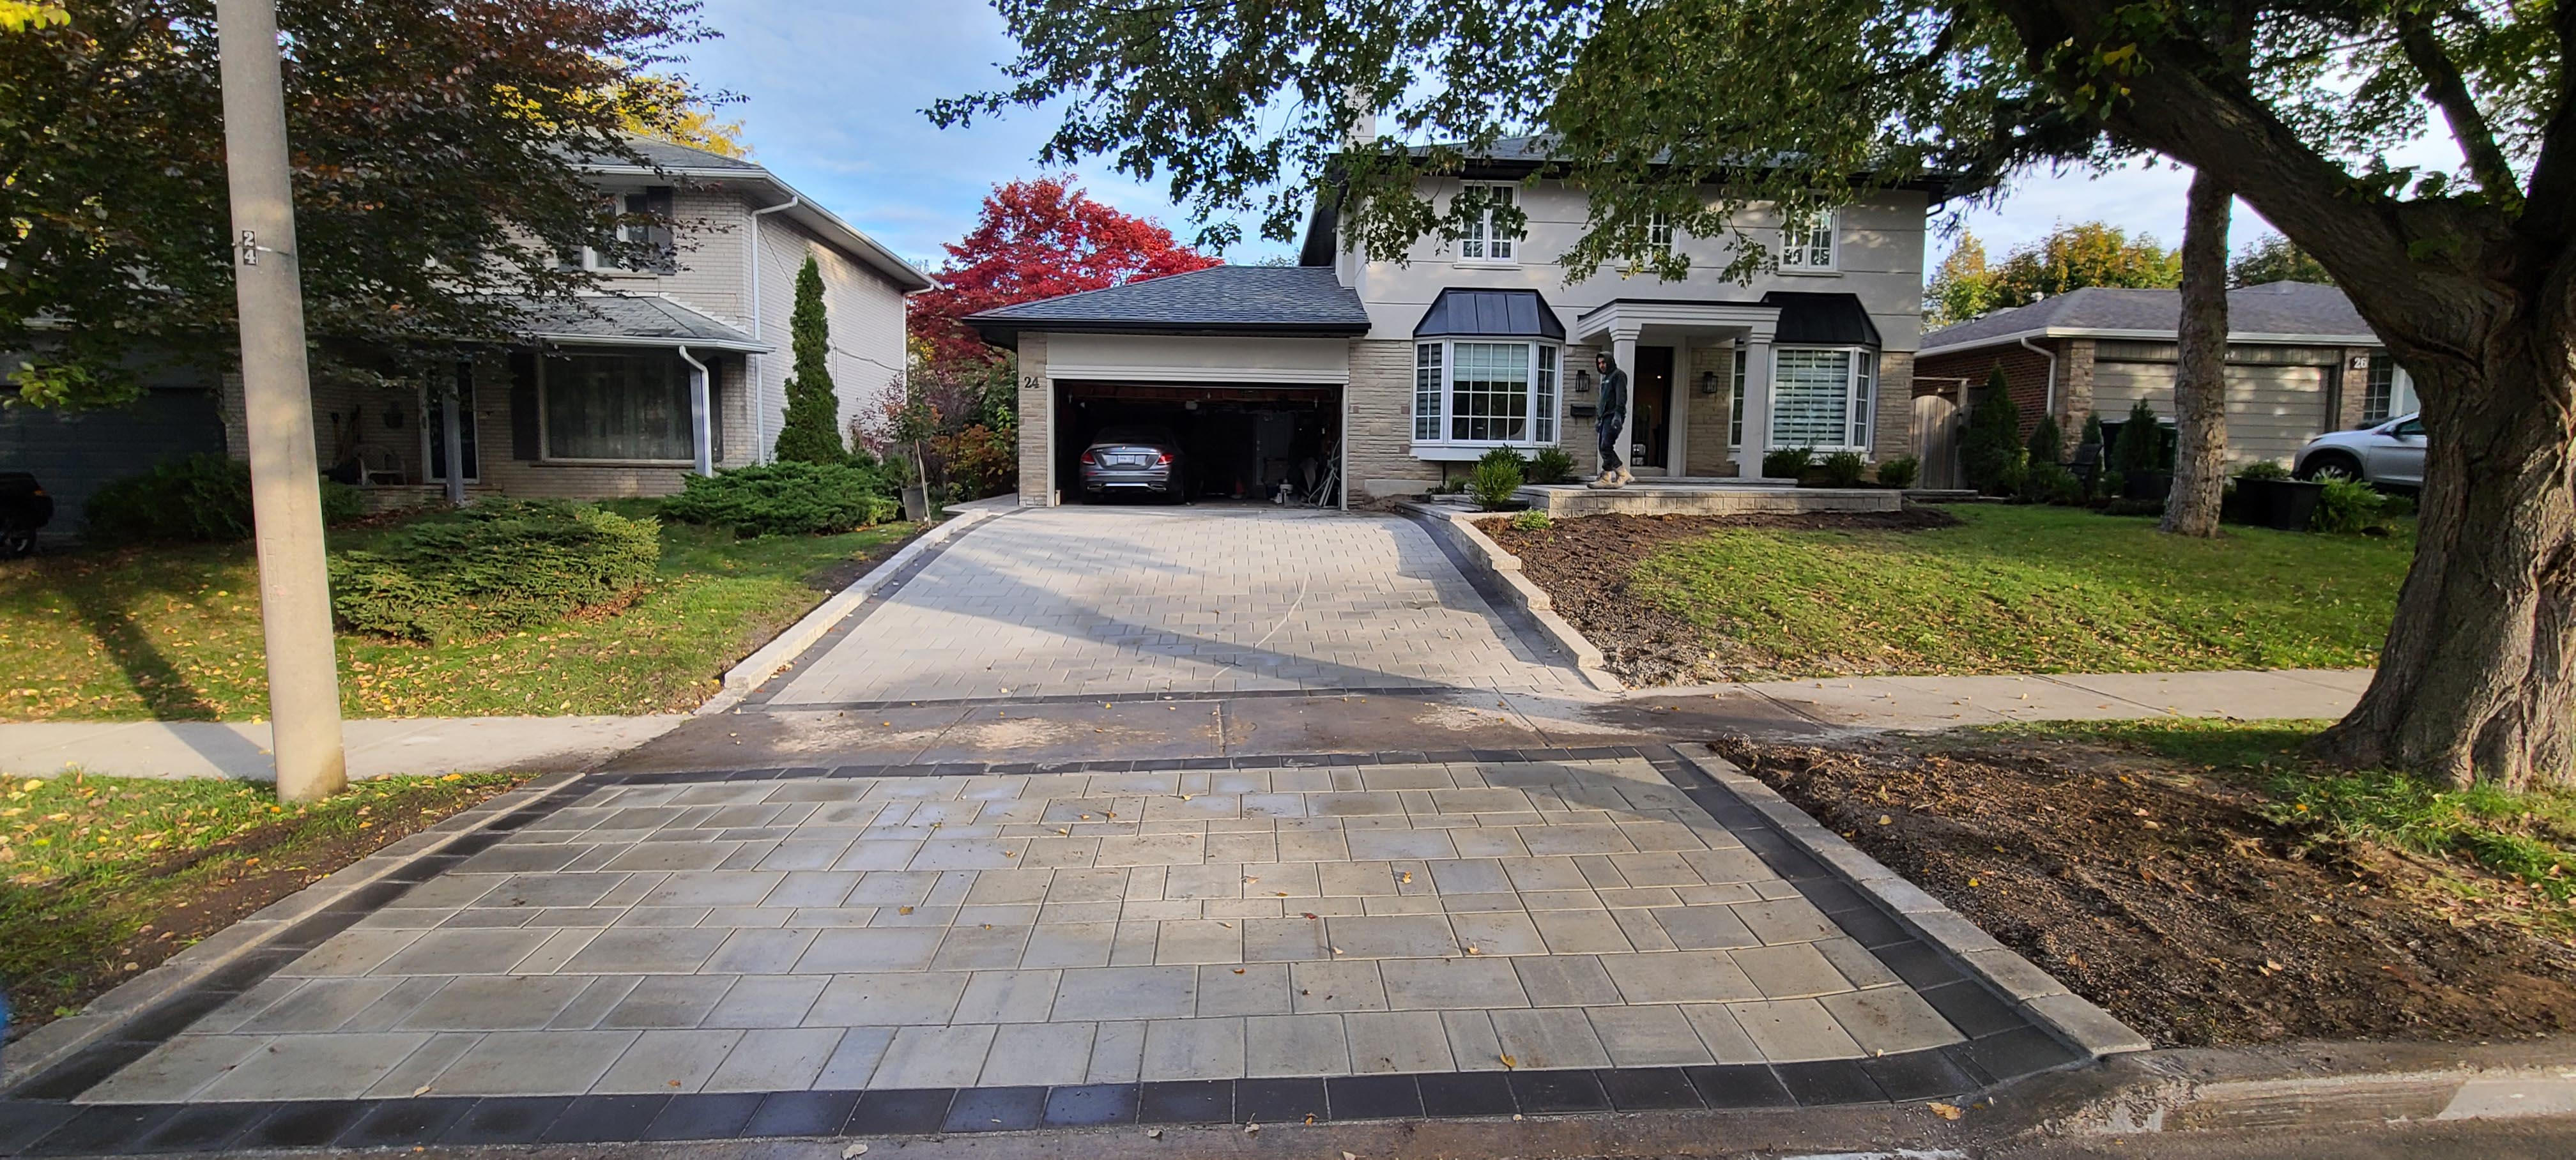 Landscaping Toronto - A Terrastone Landscaping-designed driveway in a residential area with a car parked on it.